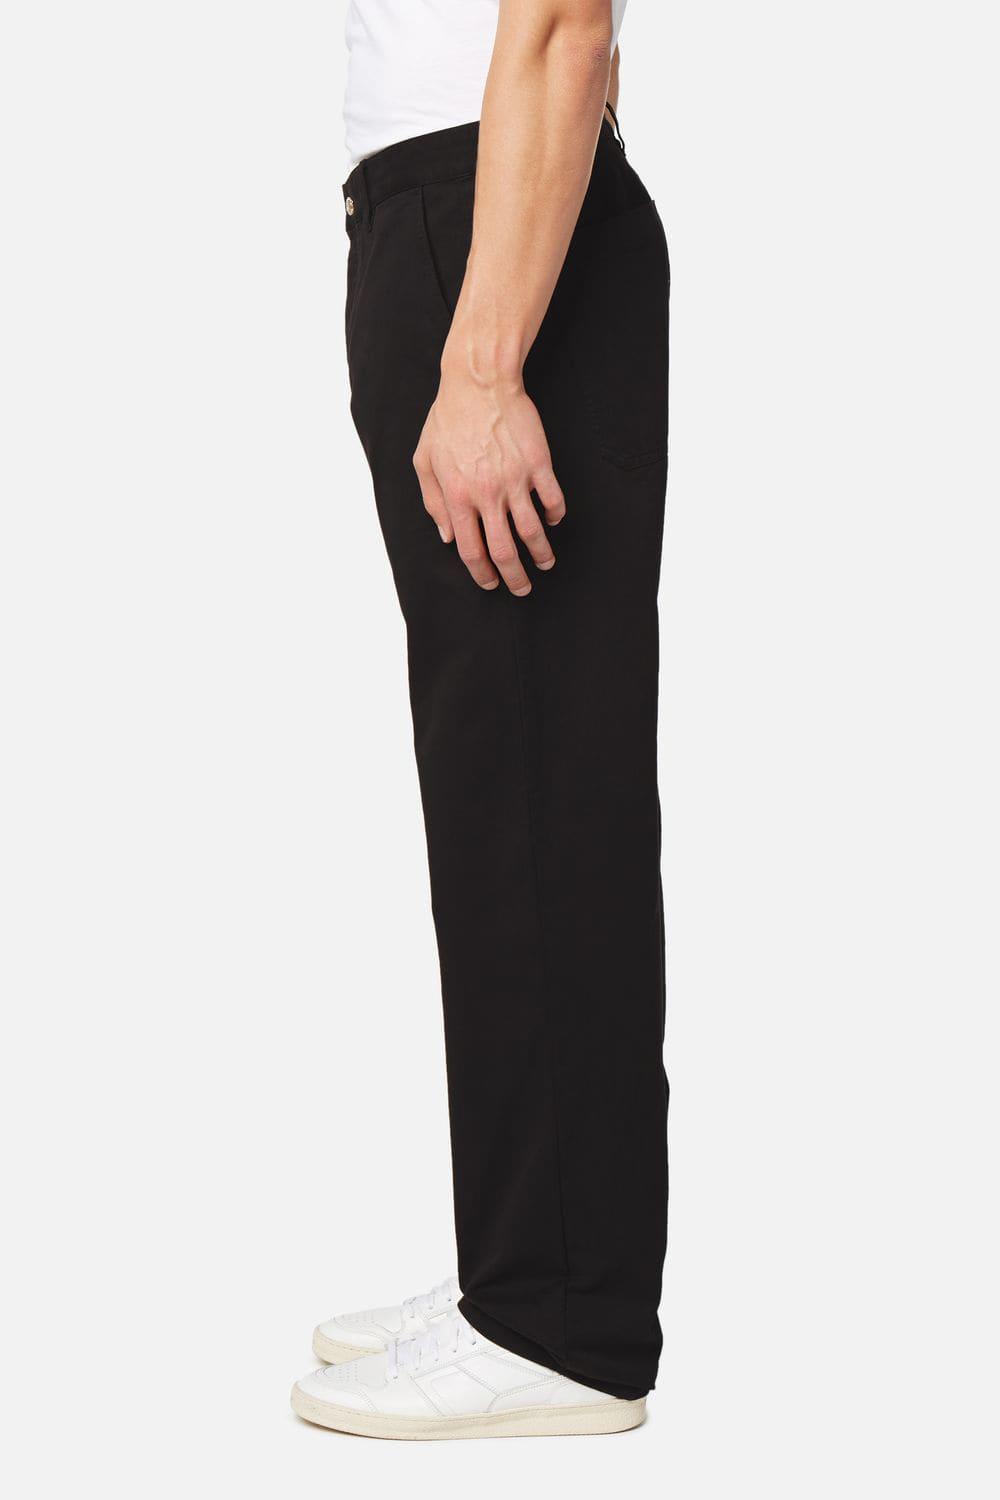 AMI Cotton Large Fit Trousers in Black for Men - Lyst